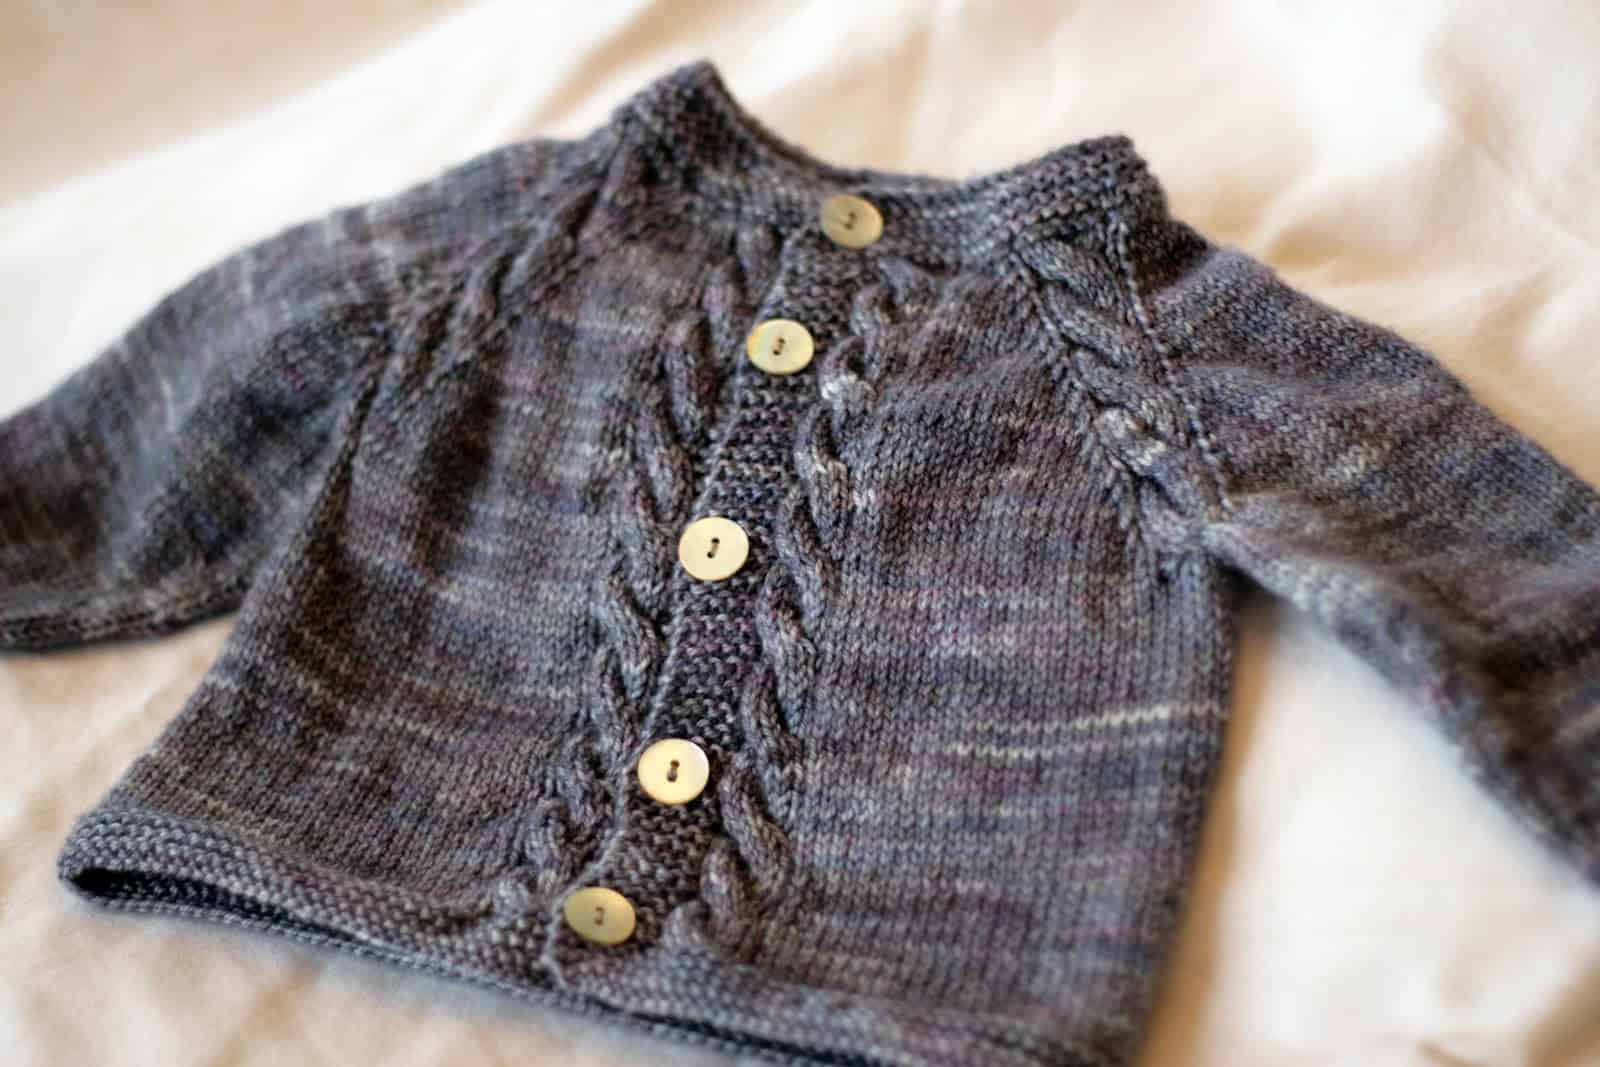 Getting Ready for Winter: Pretty Knitted Baby Sweater Patterns